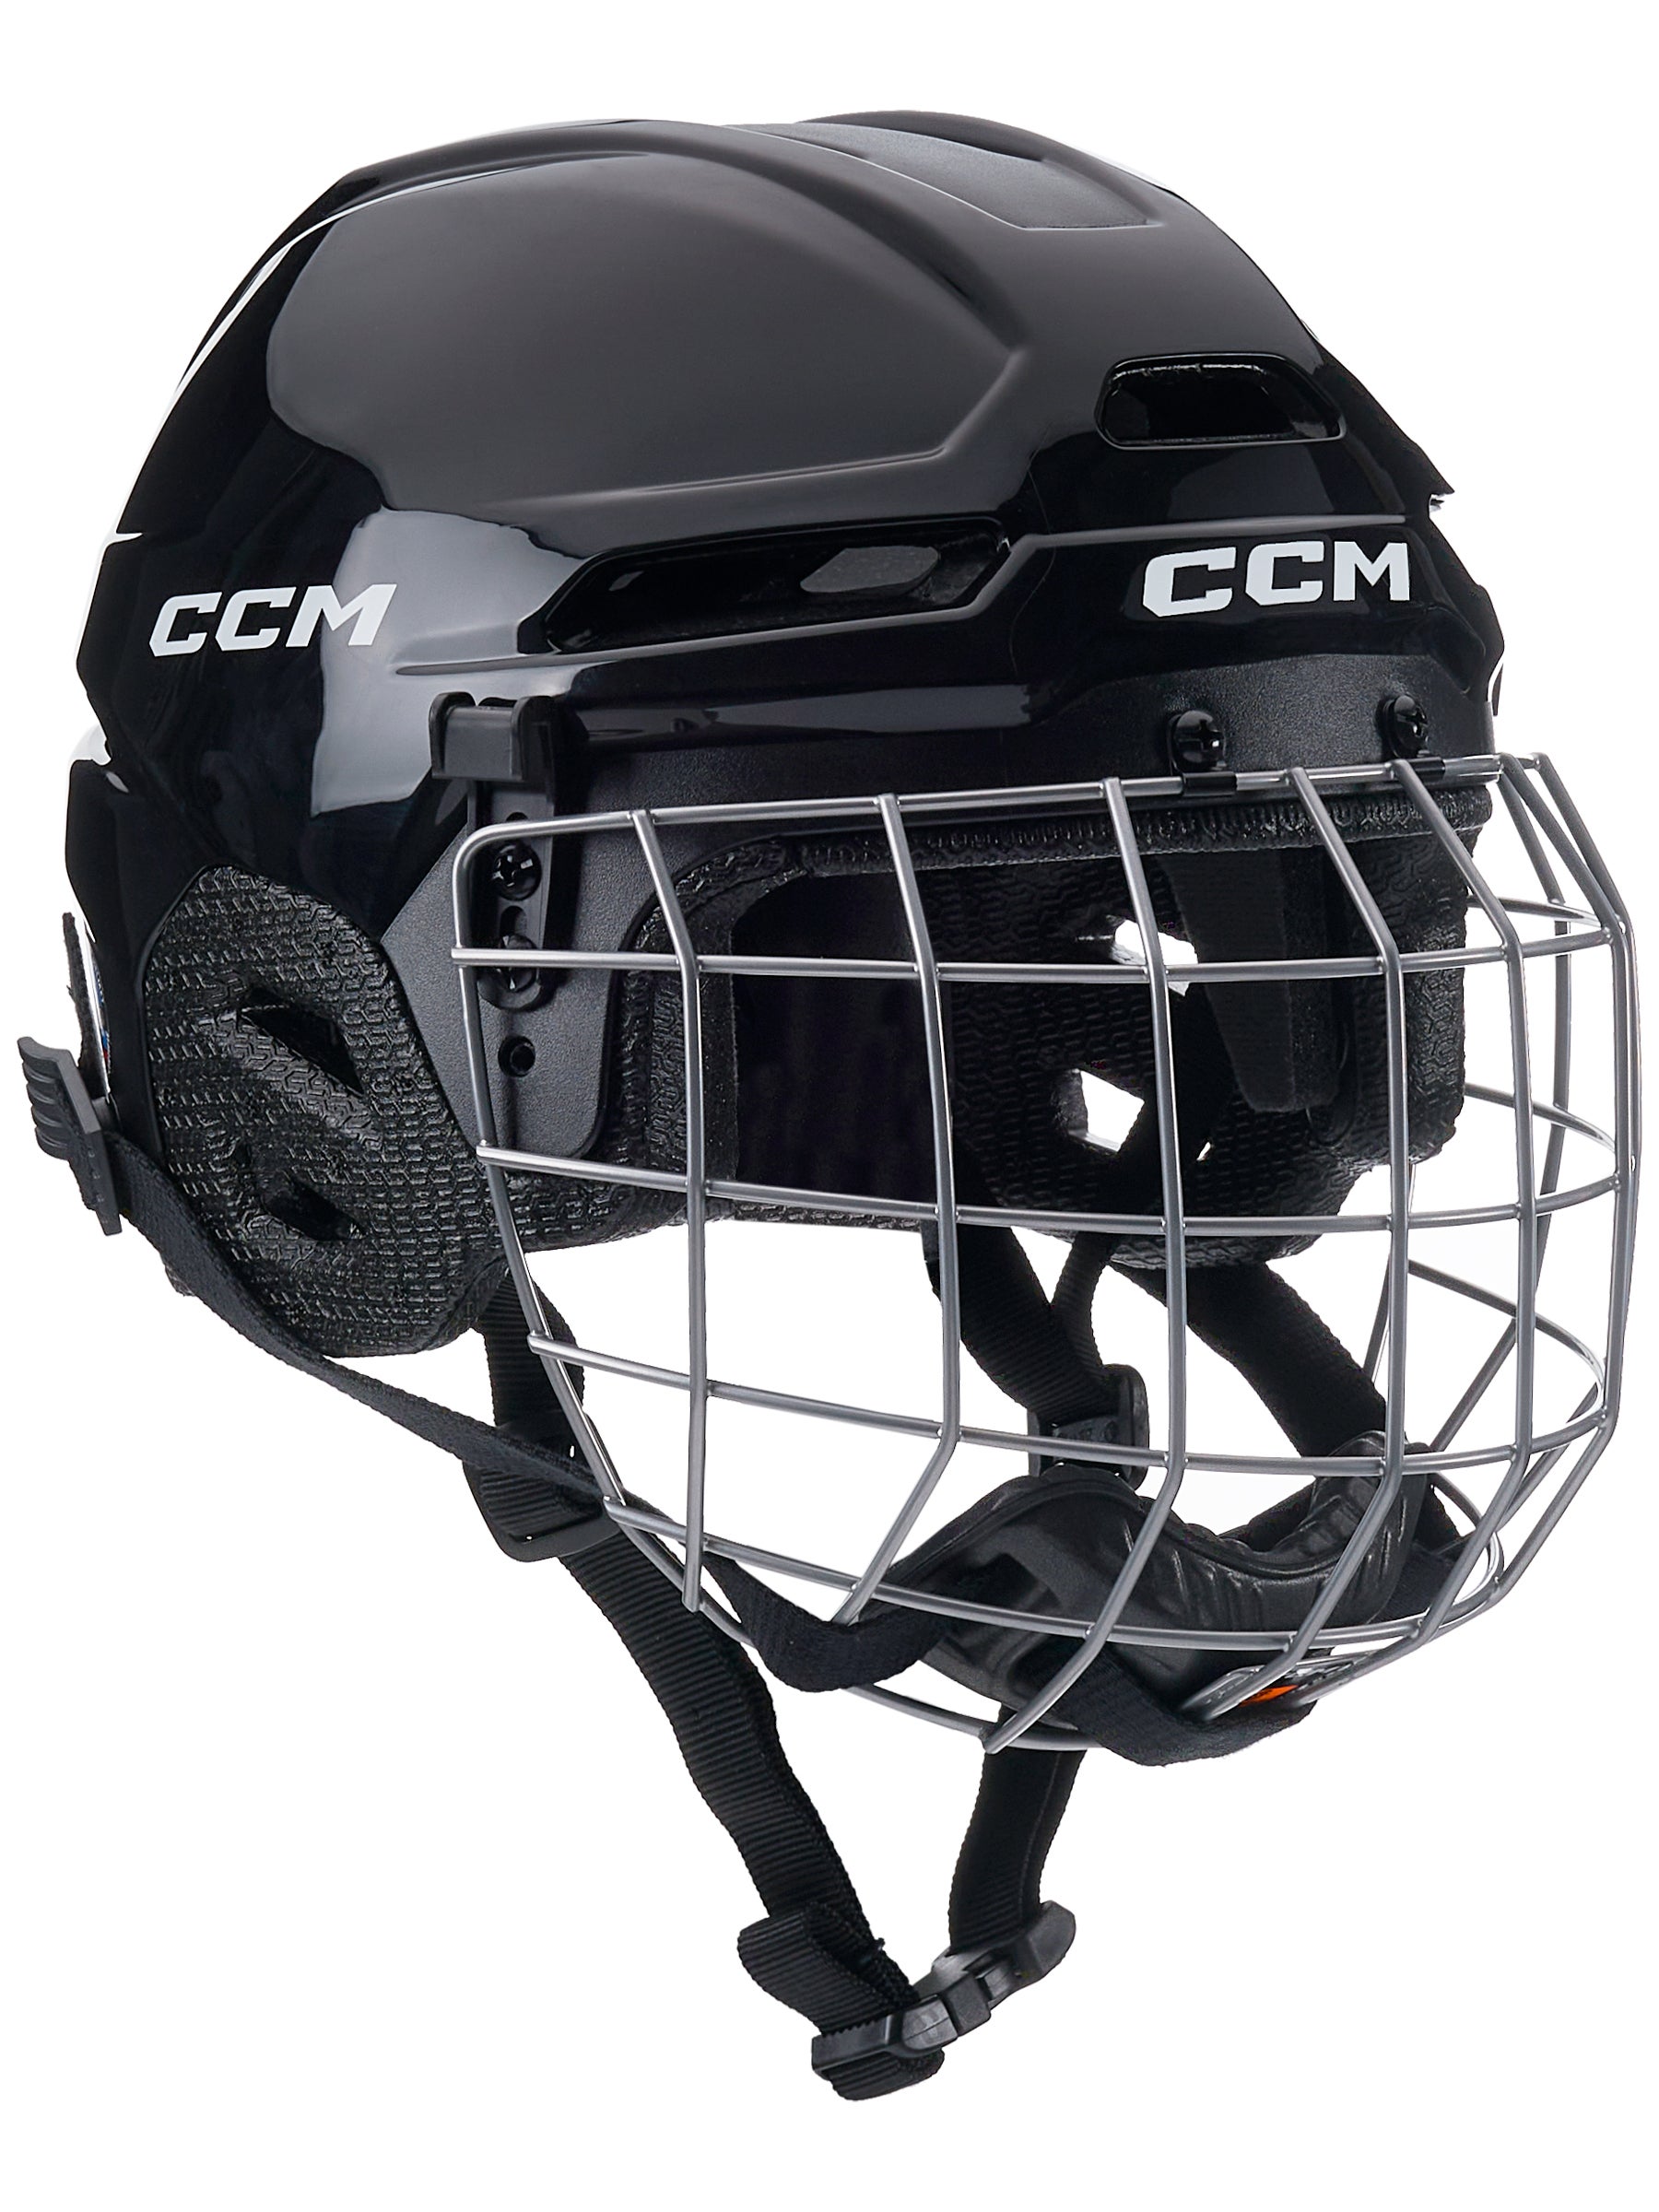 CCM Fit-Lite 80 Bull Riding Rodeo Mutton Buster Helmet *NEW* BLACK Large 